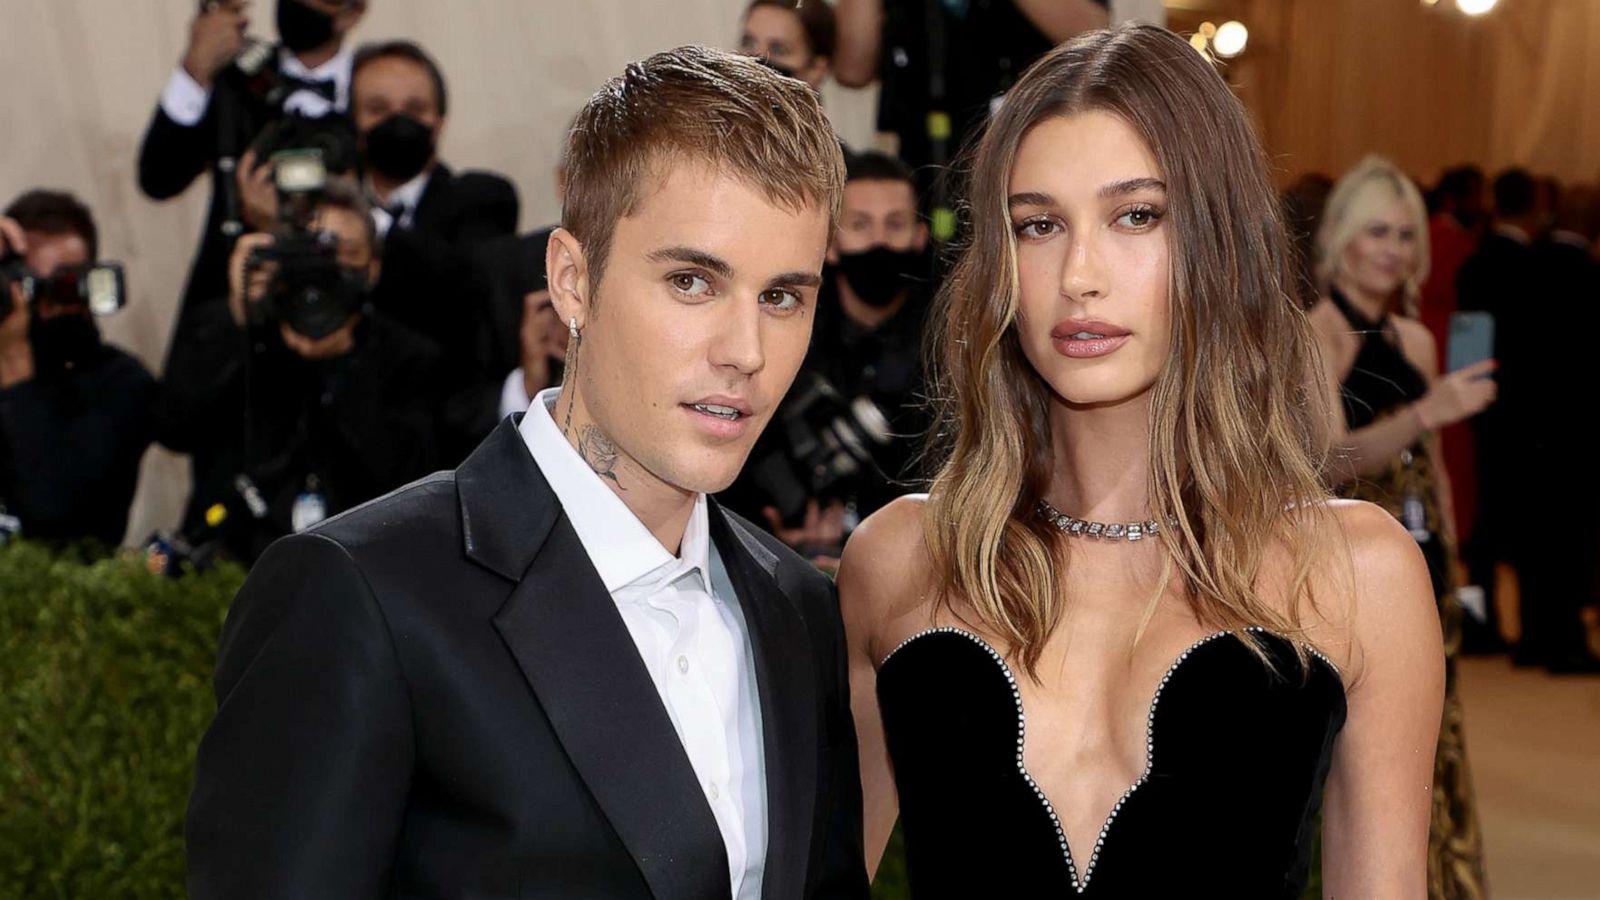 Justin and Hailey Bieber's wedding: All the information we know so